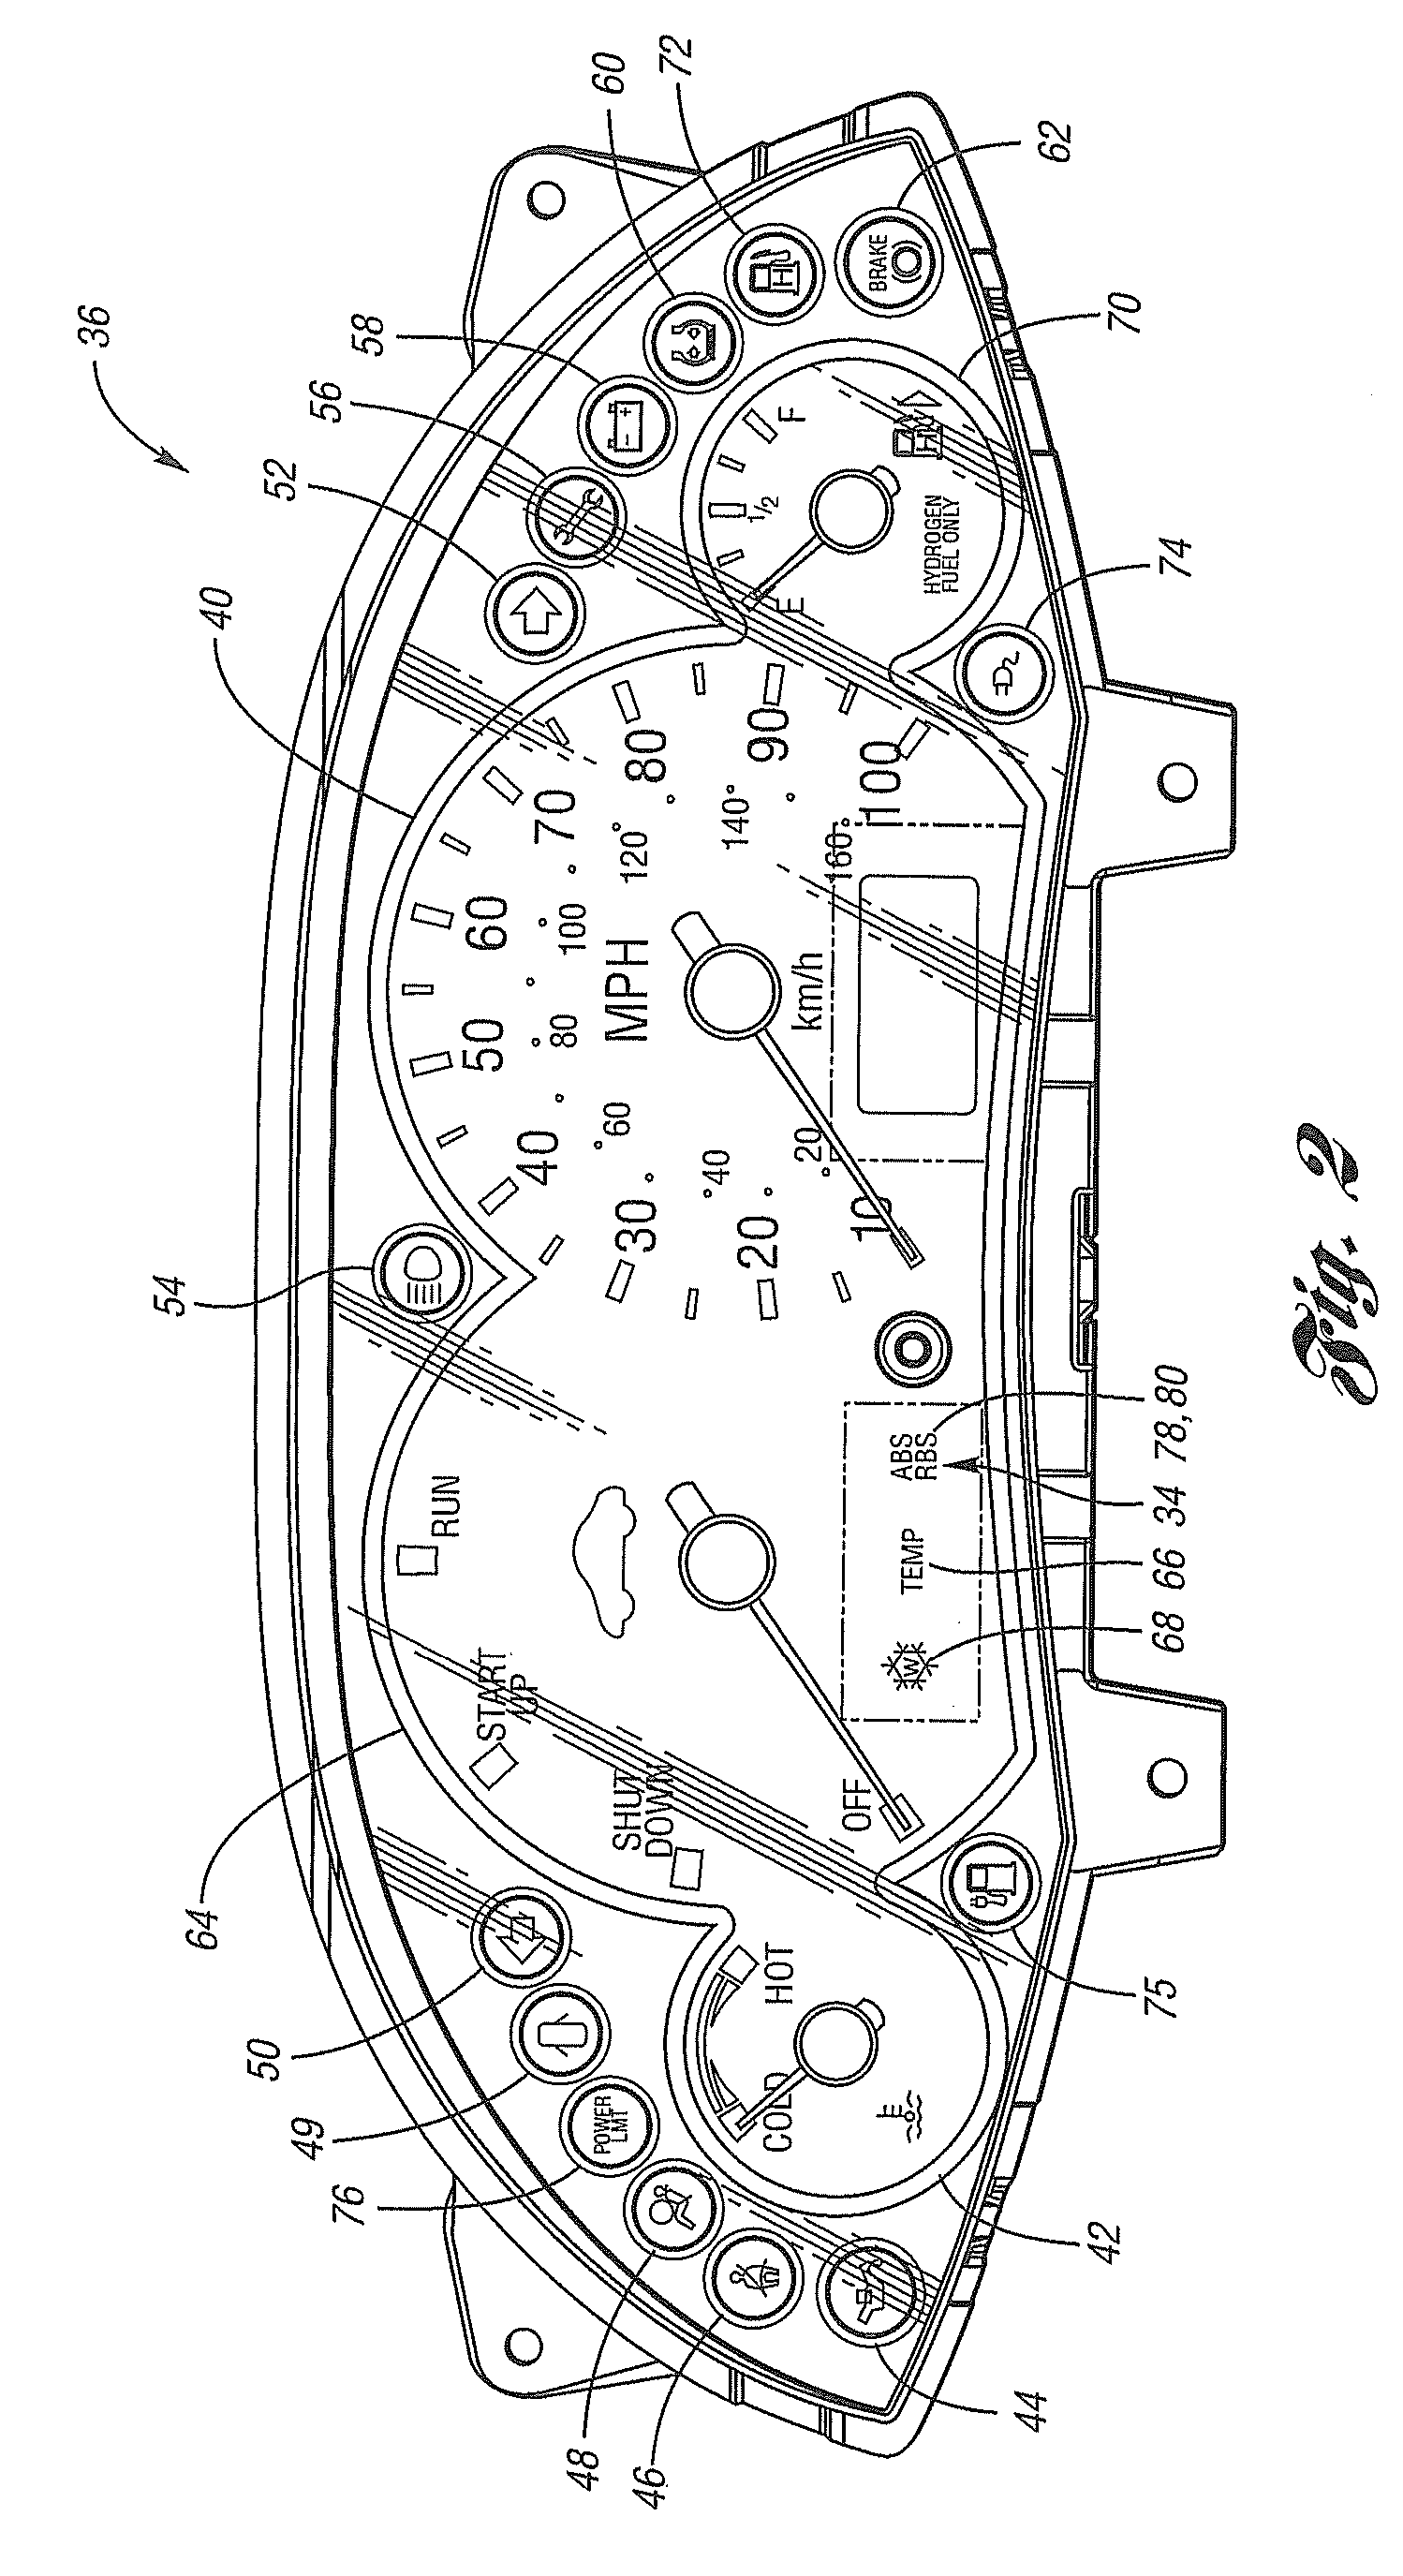 Vehicle and method for controlling brake system indicators